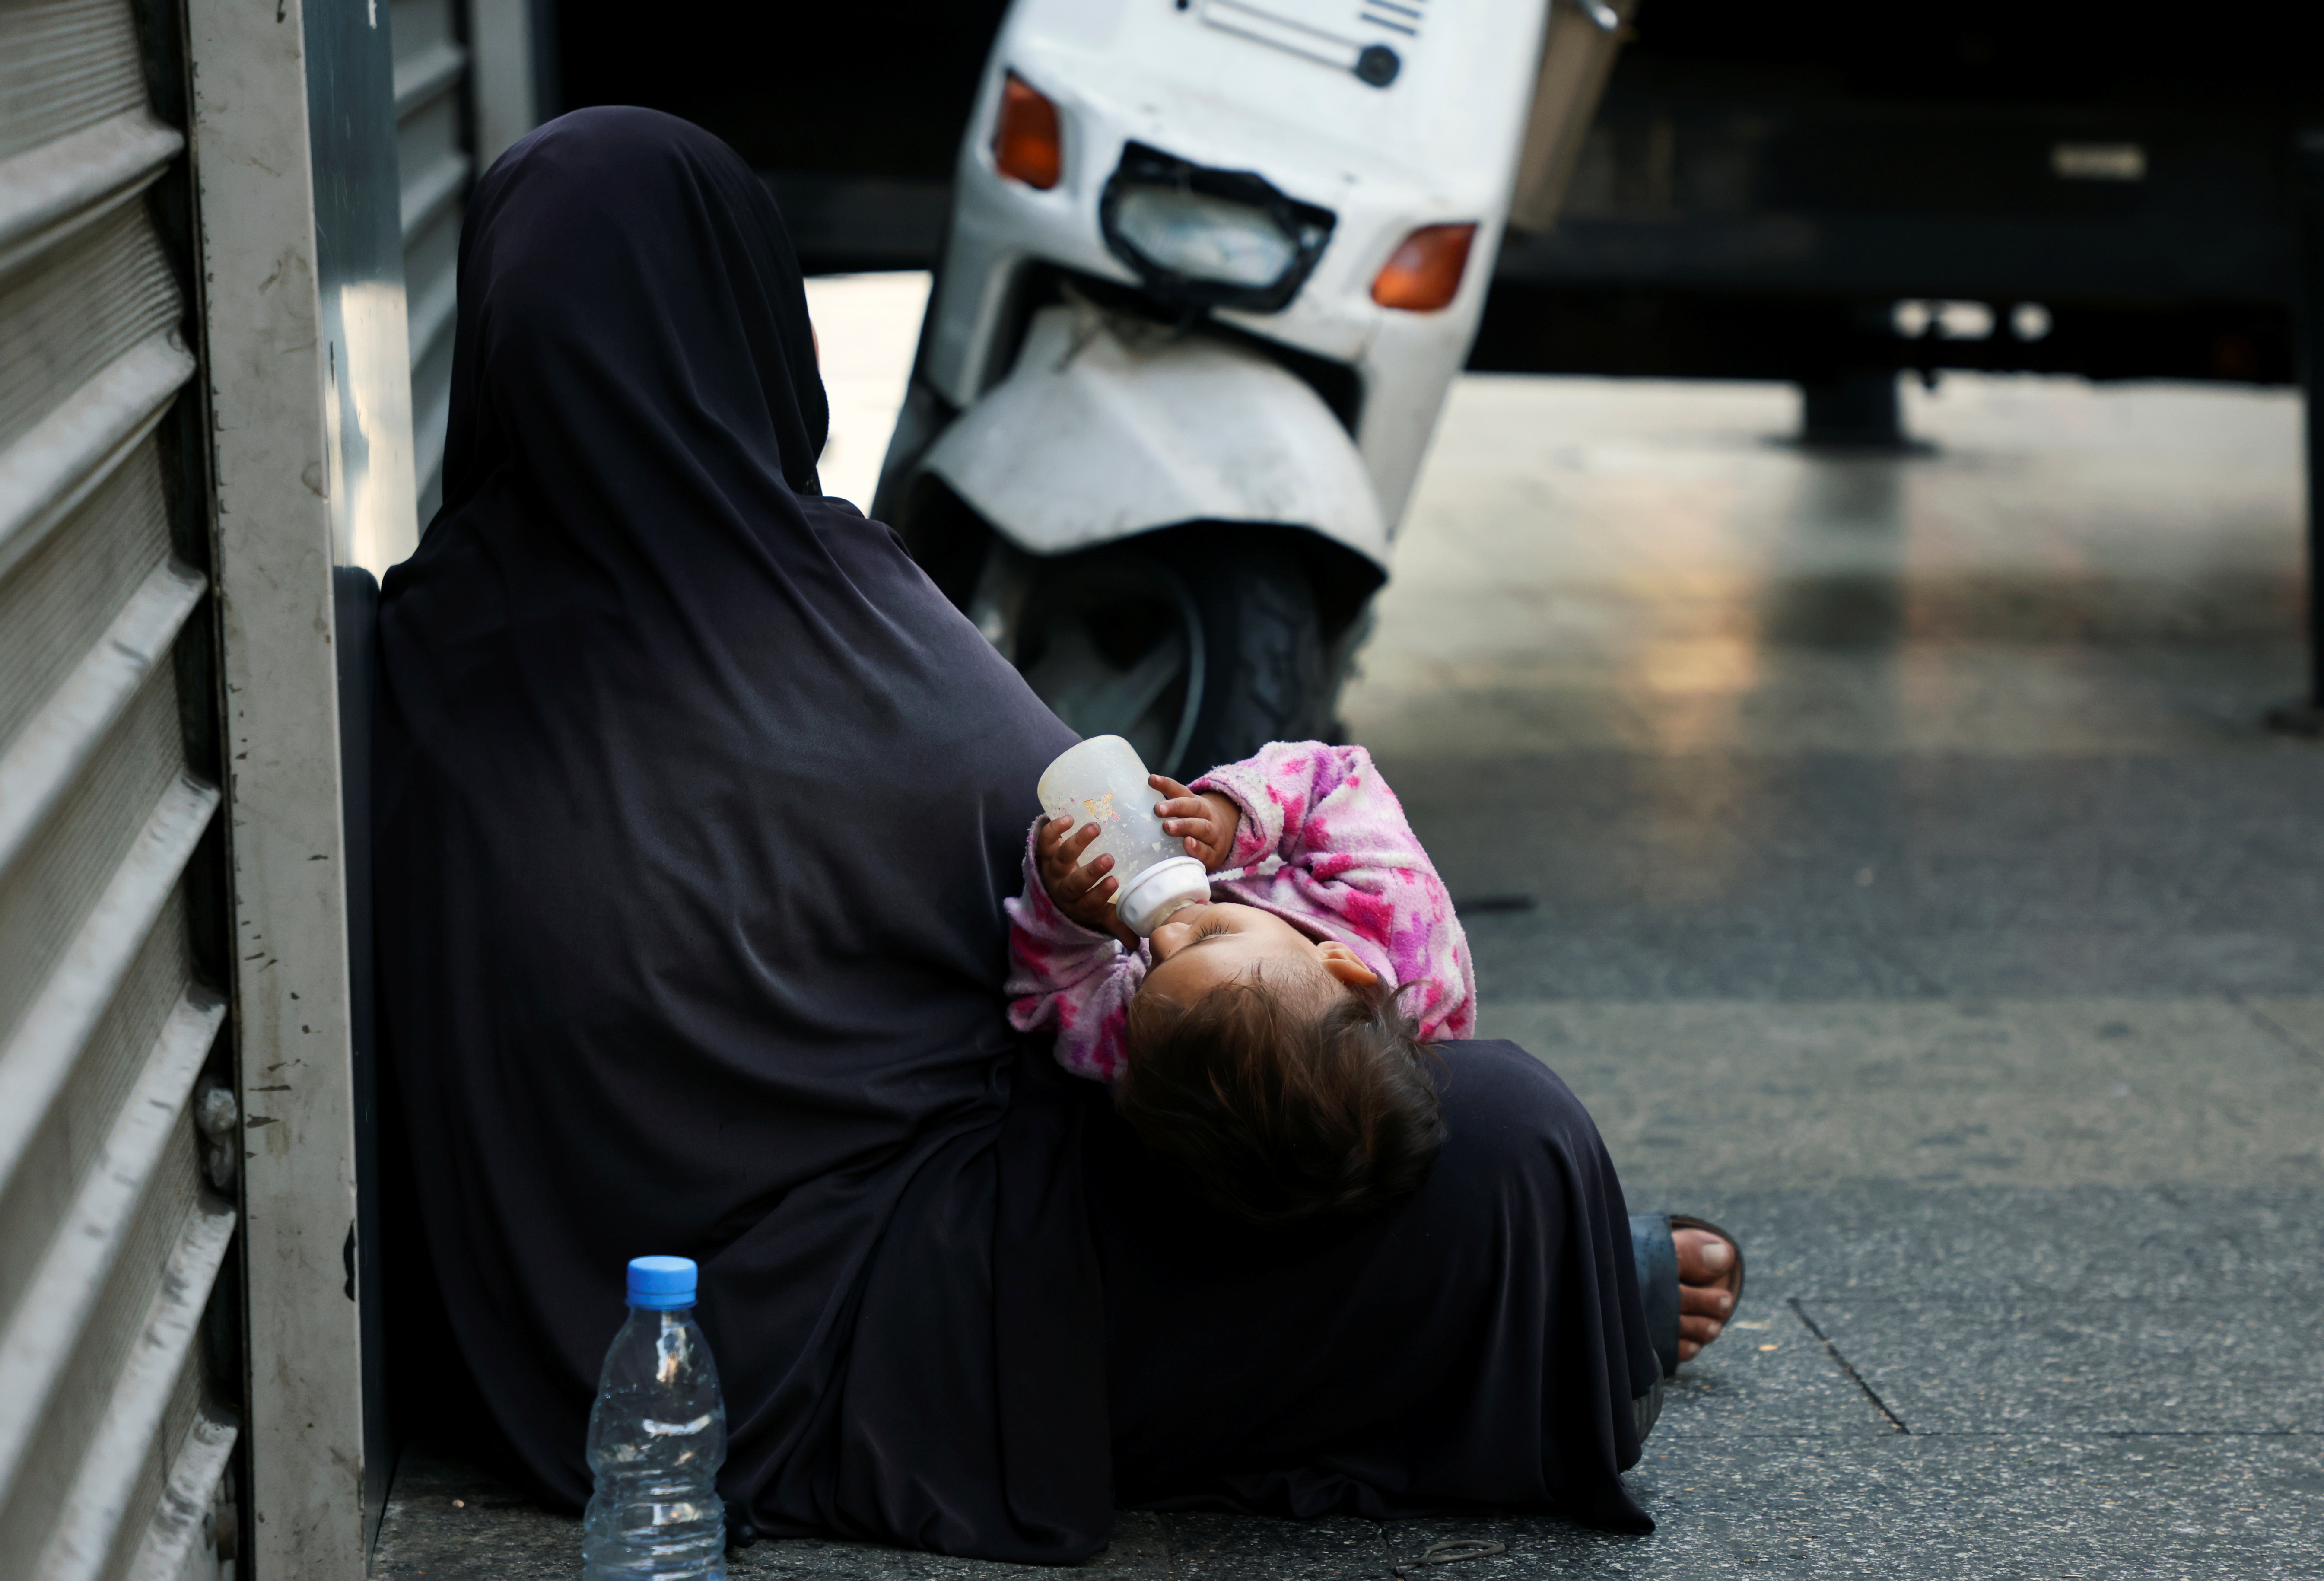 A woman begs with her child on a sidewalk in Beirut